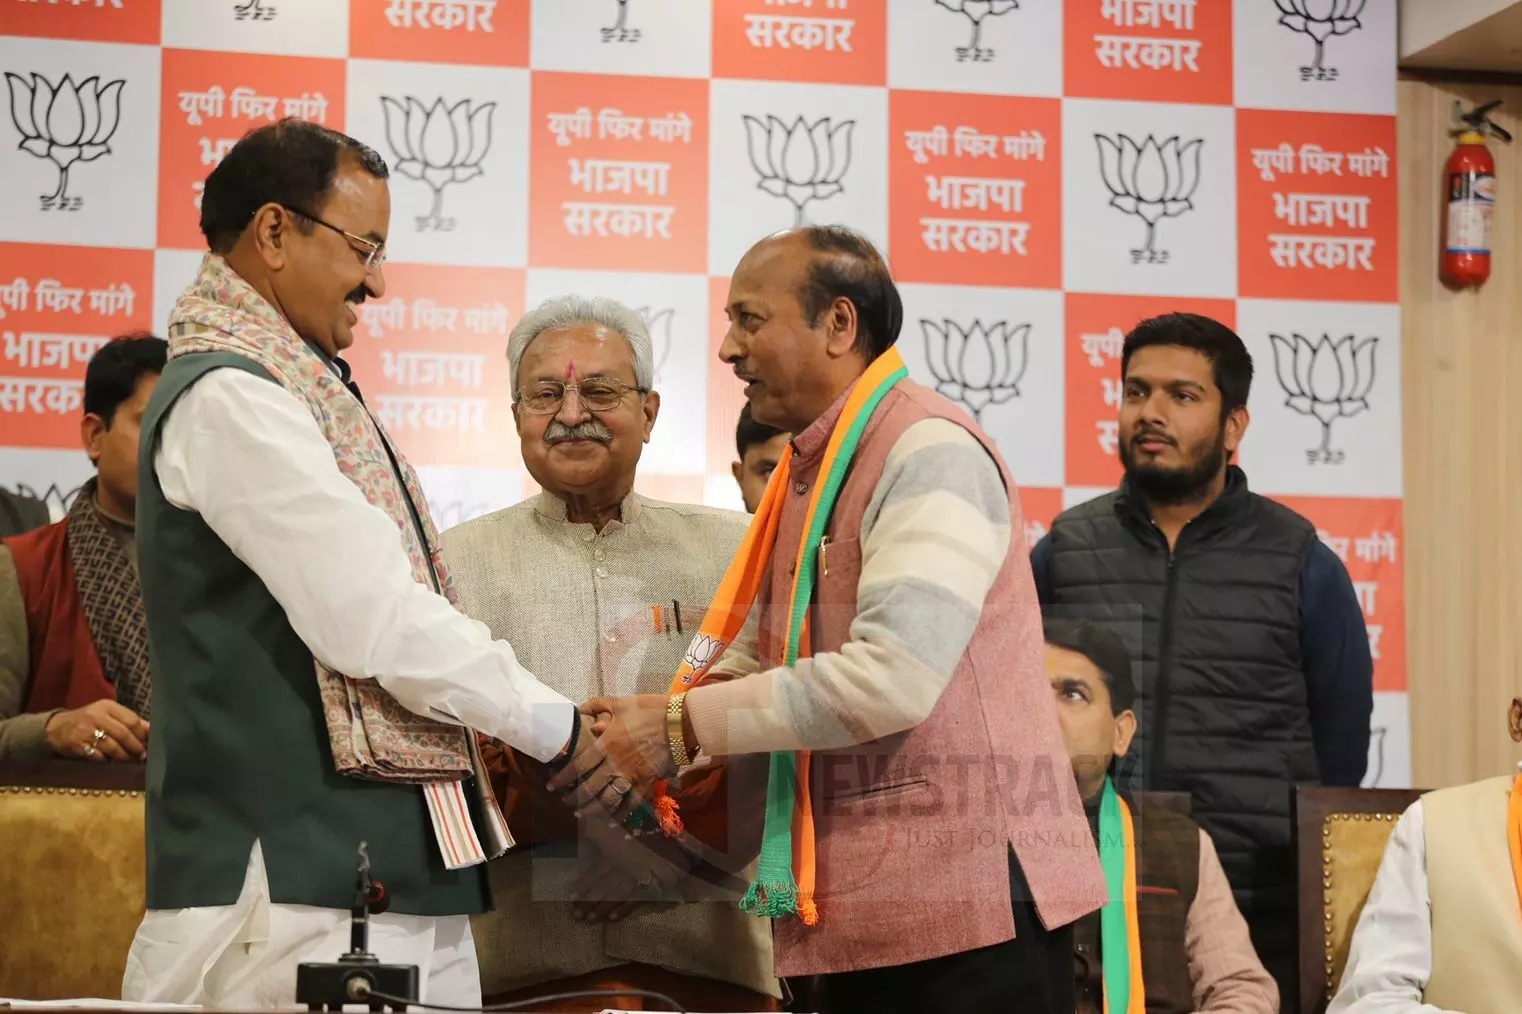 People from different parties joined BJP